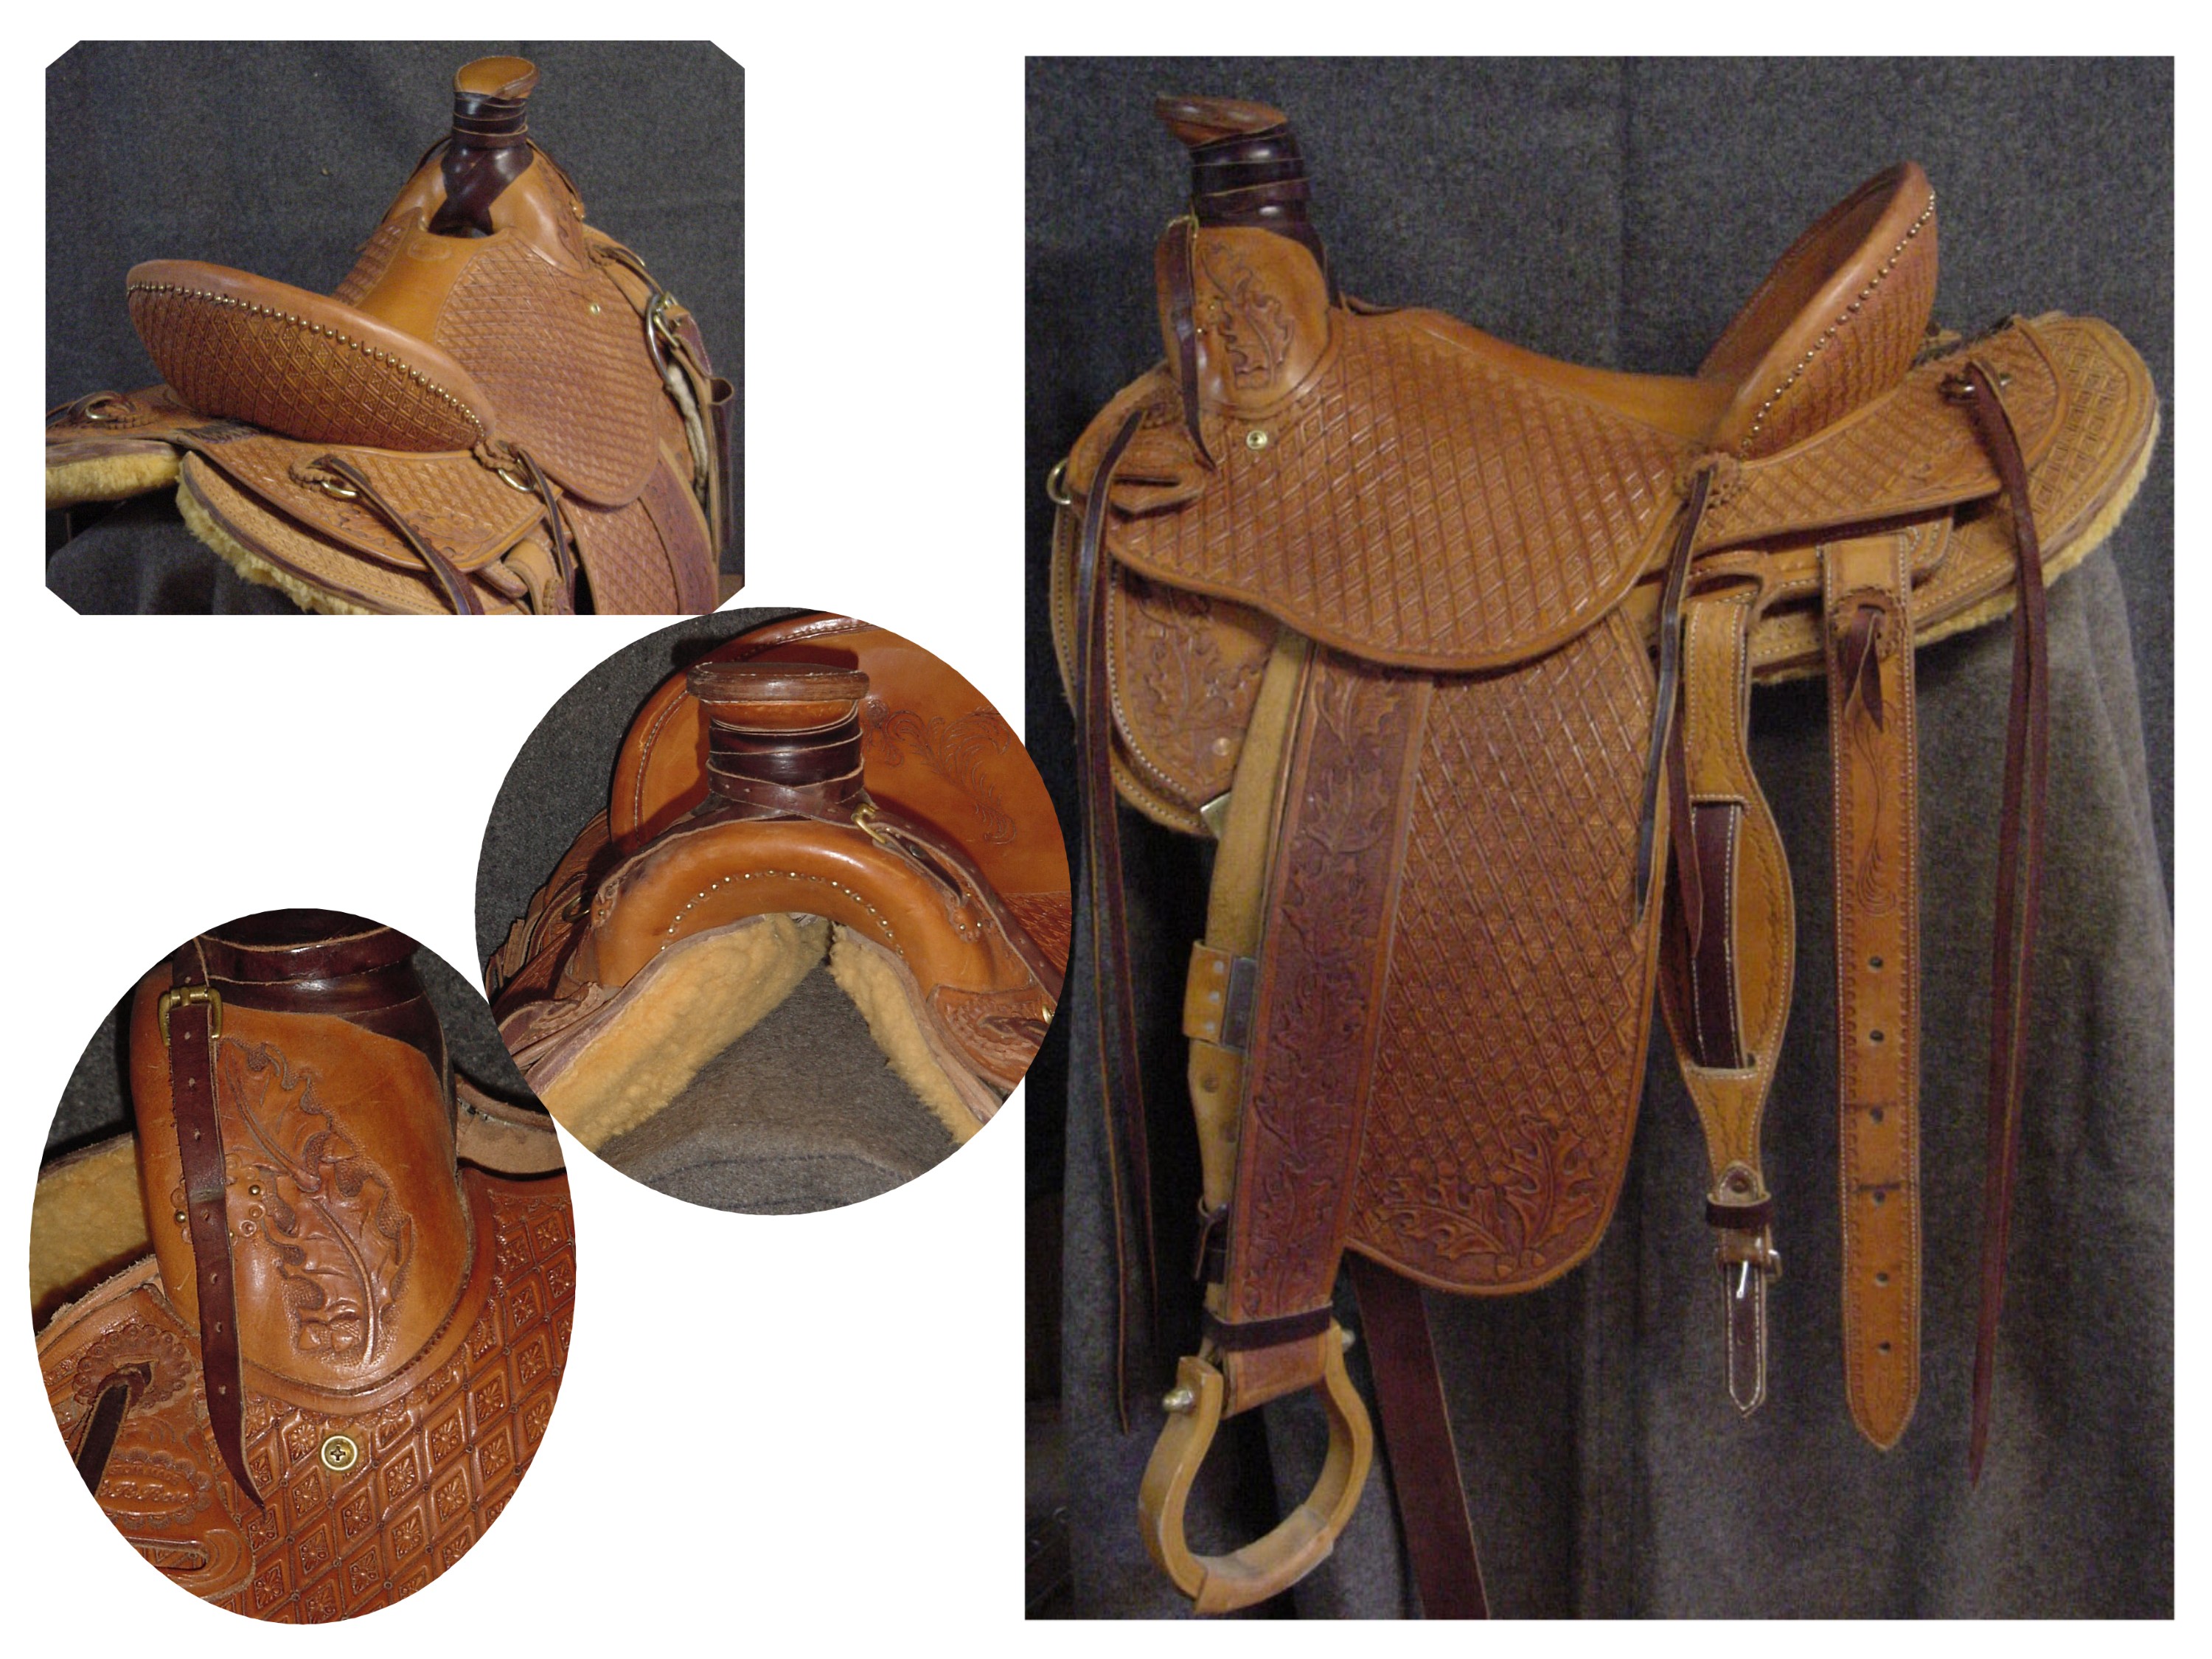 used saddle, dimond stamp, #4 horn    $2095.00